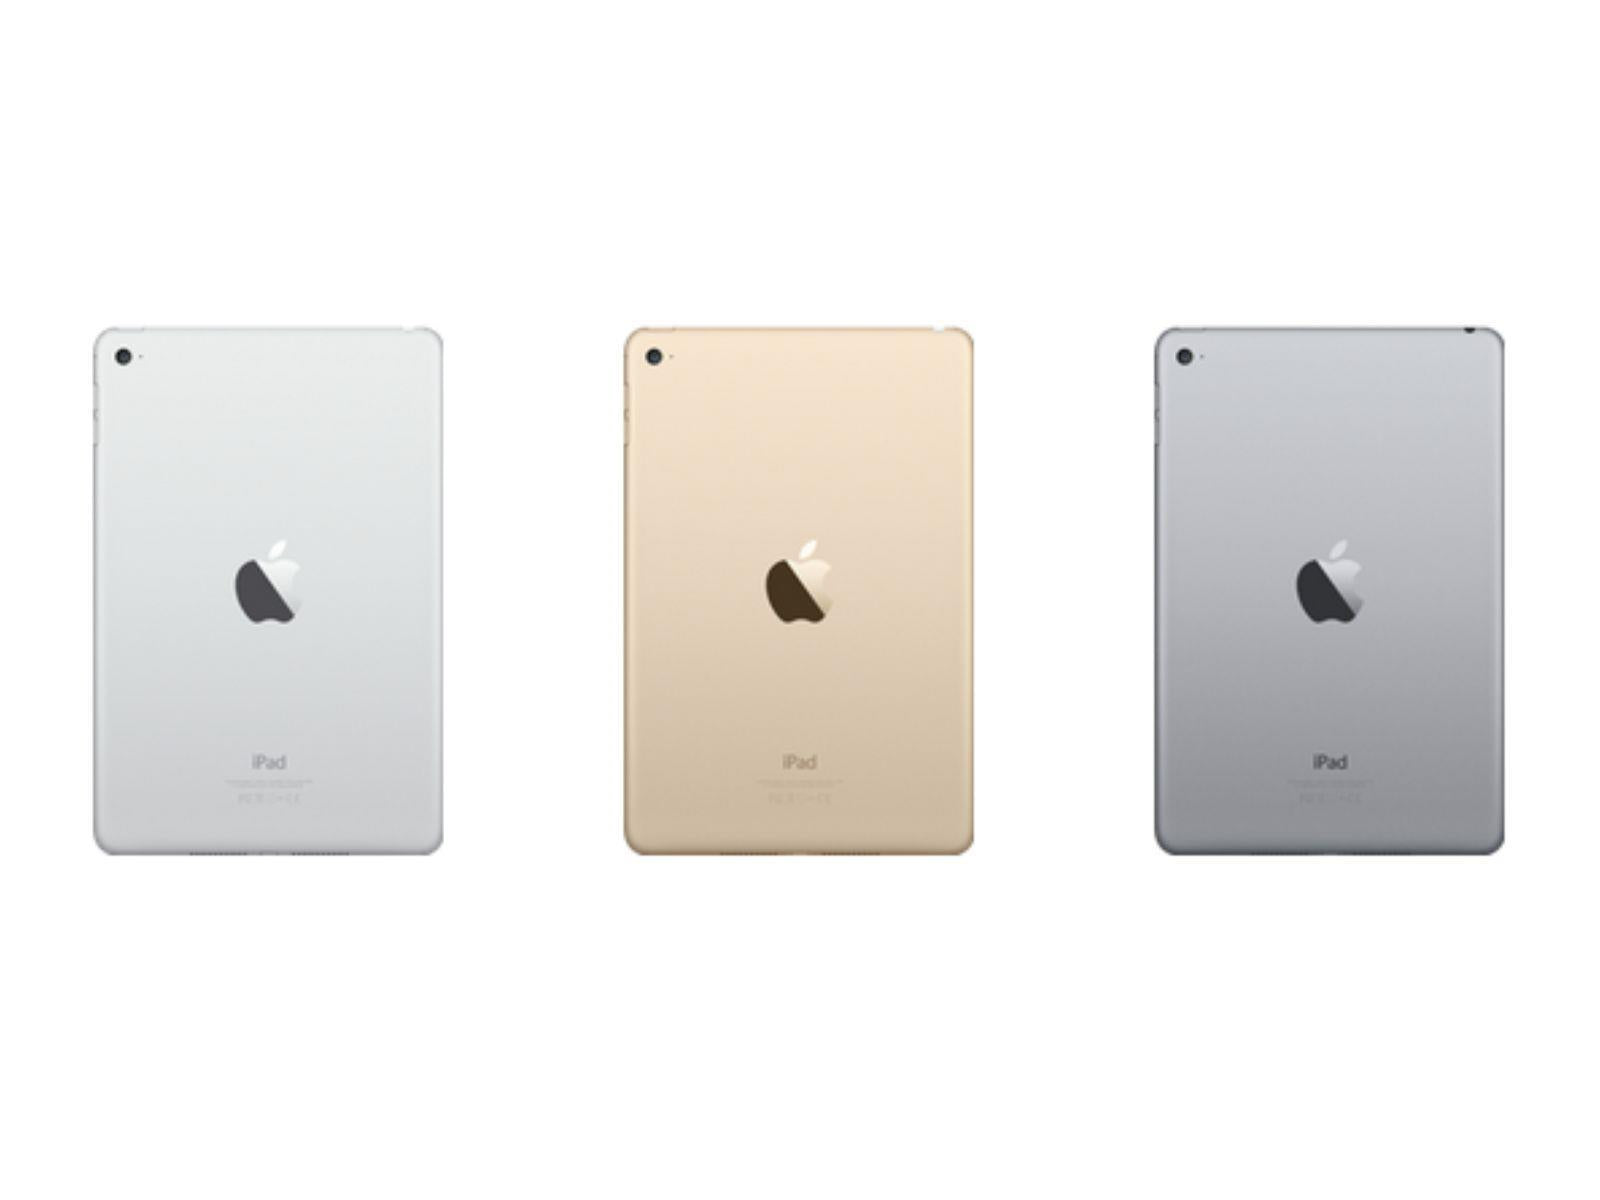 Image shows a rear view of all colours of the Apple iPad Mini 4th Generation